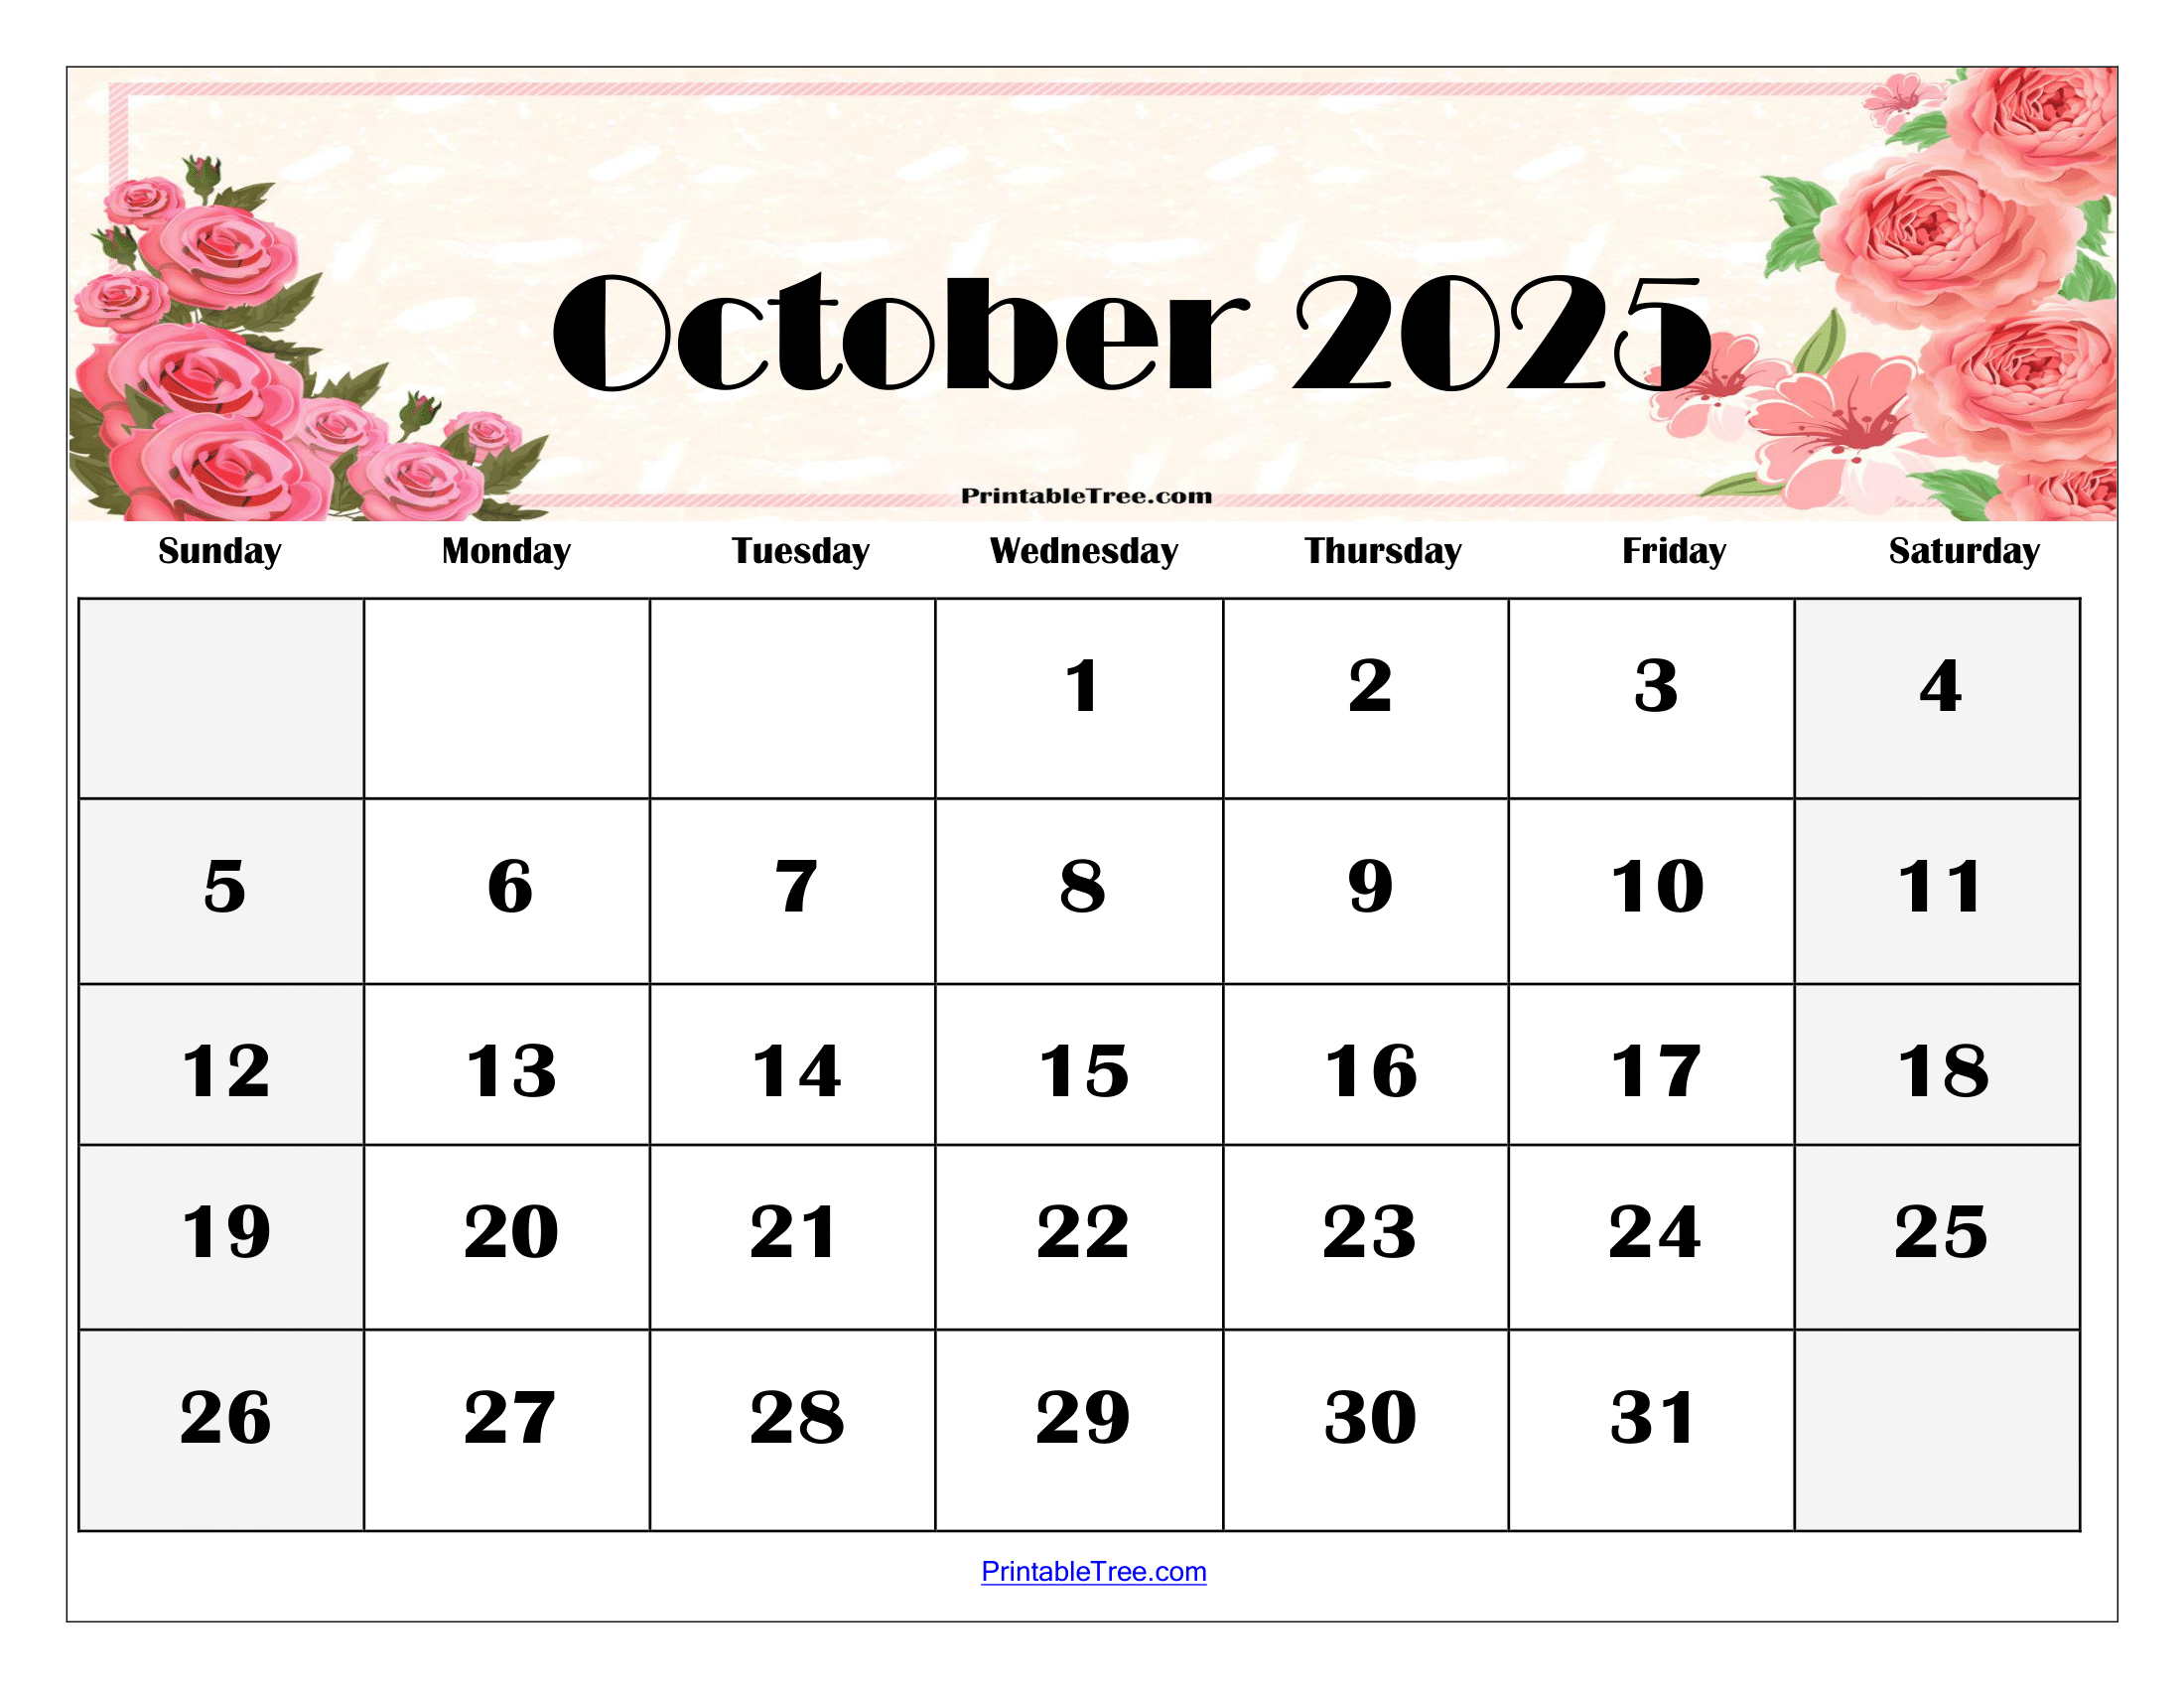 October calendar printable pdf template with holidays